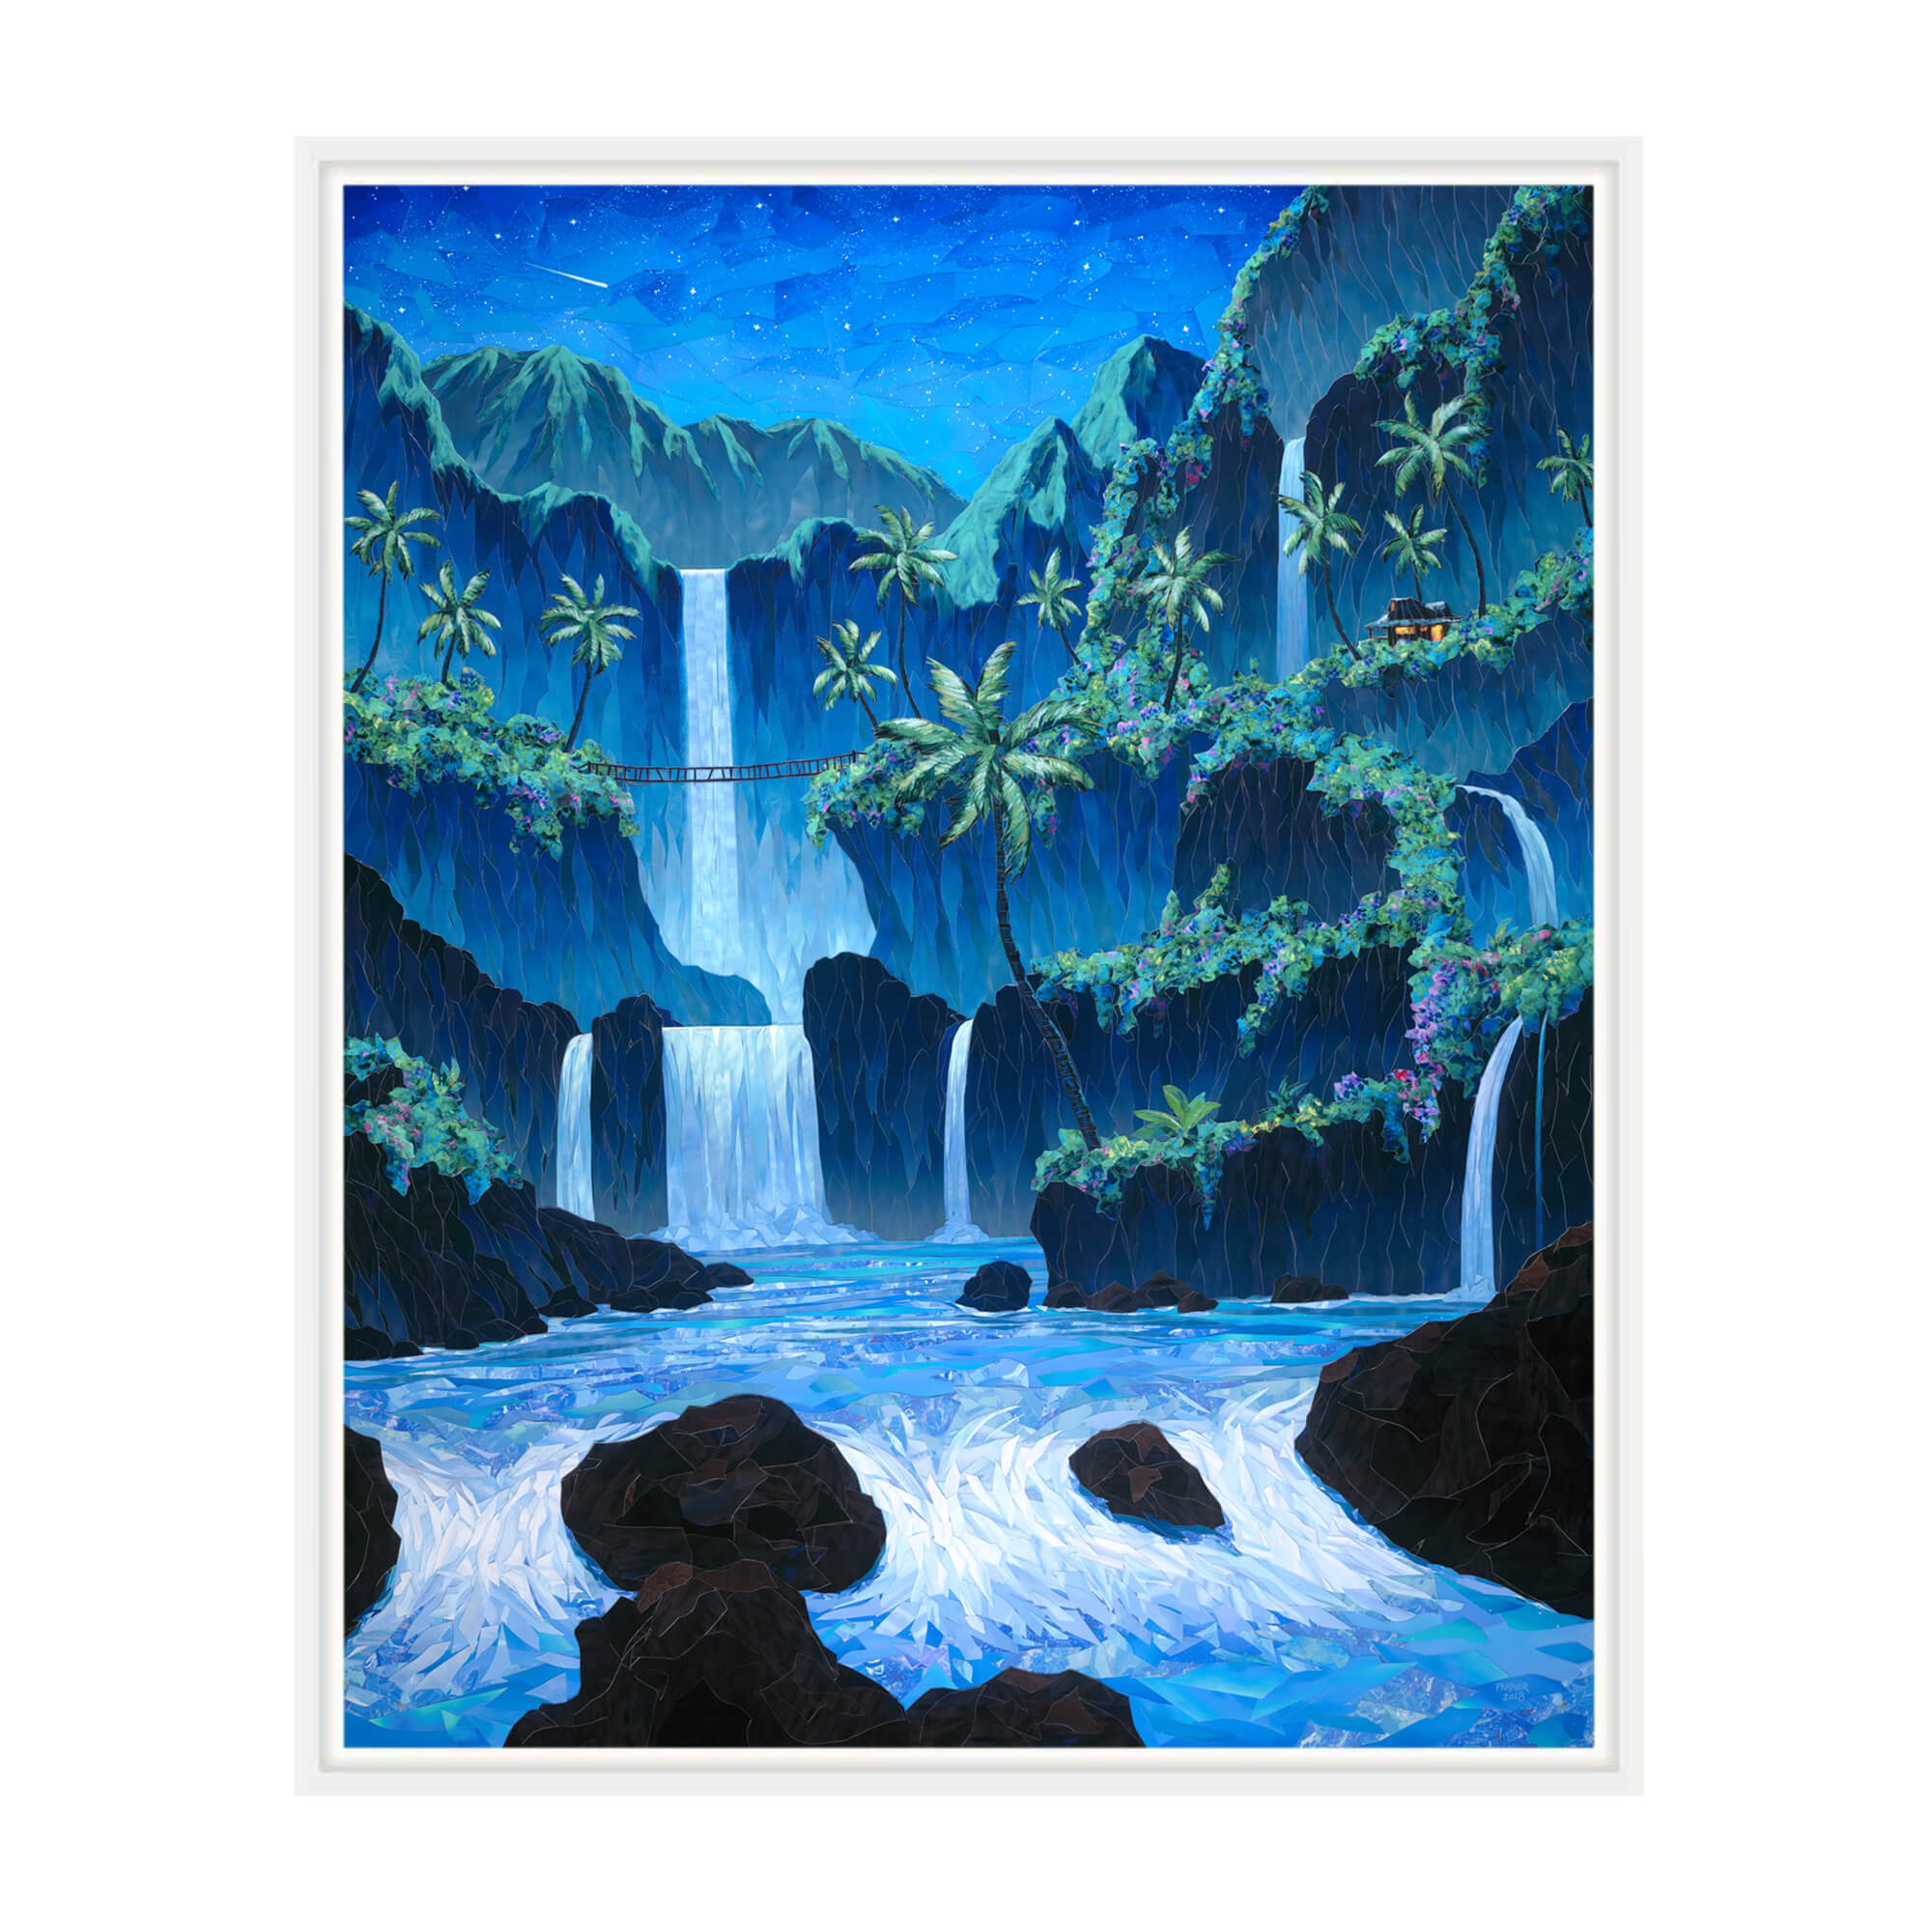 A framed canvas giclée art print featuring a collage of a dreamy tropical paradise with several waterfalls, surrounded by Mountains and colorful tropical flowers by Hawaii artist Patrick Parker